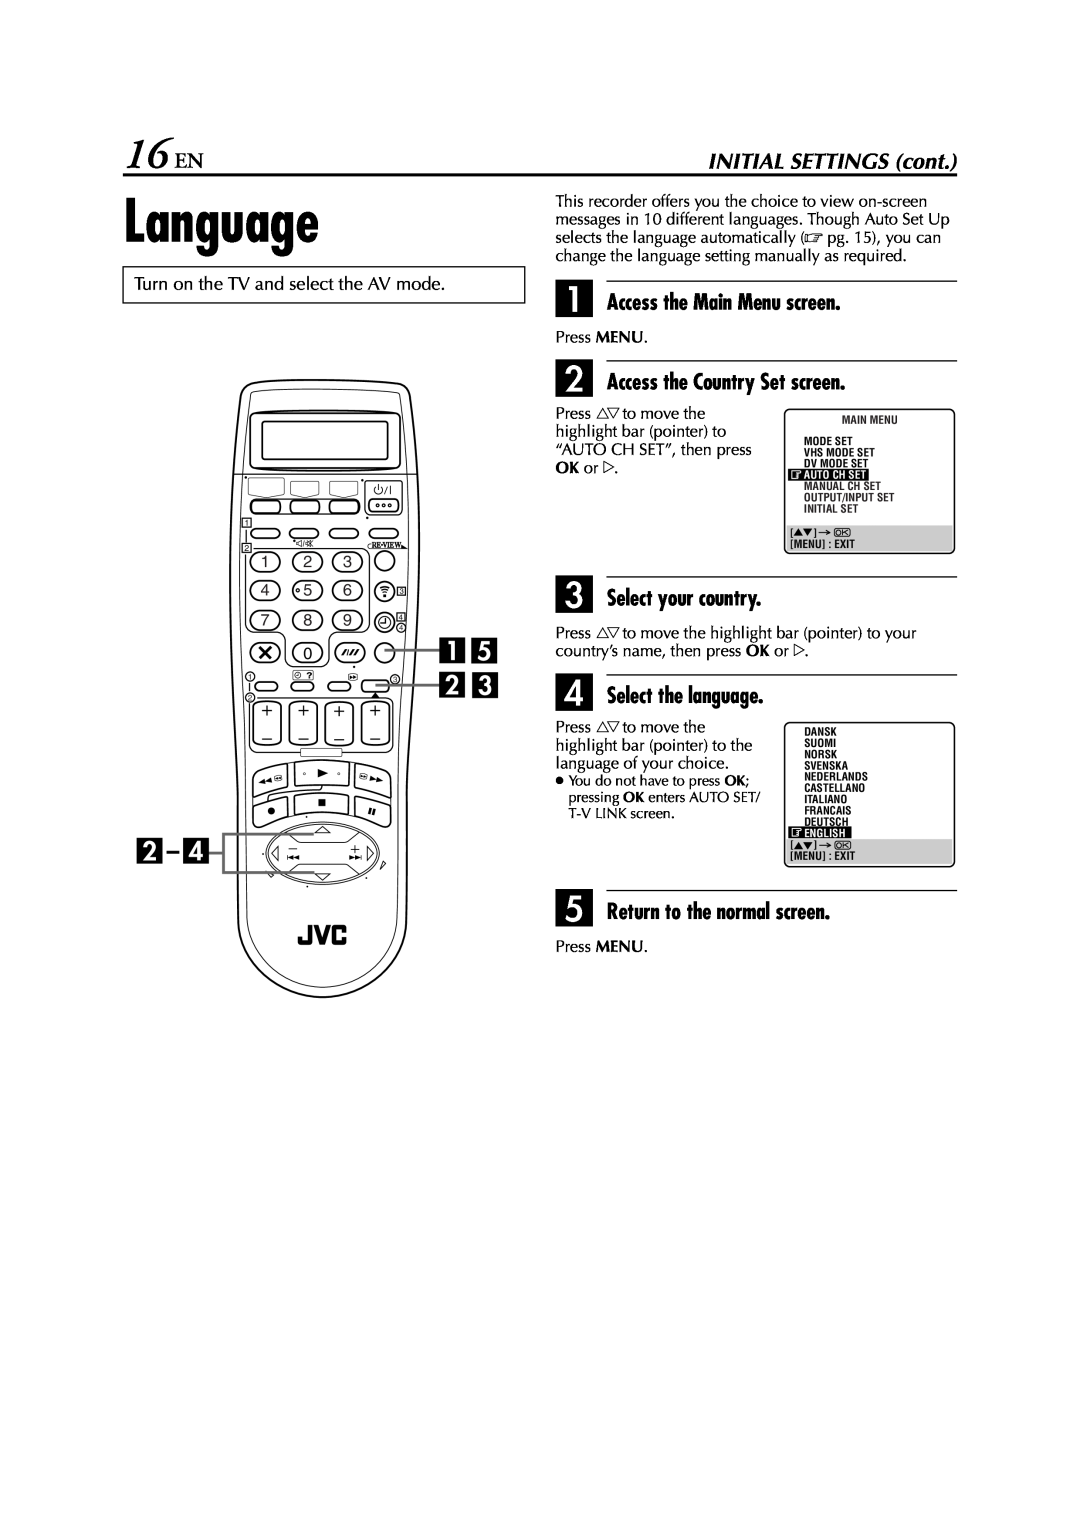 JVC LPT0616-001A Language, 16 EN, A Access the Main Menu screen, B Access the Country Set screen, C Select your country 